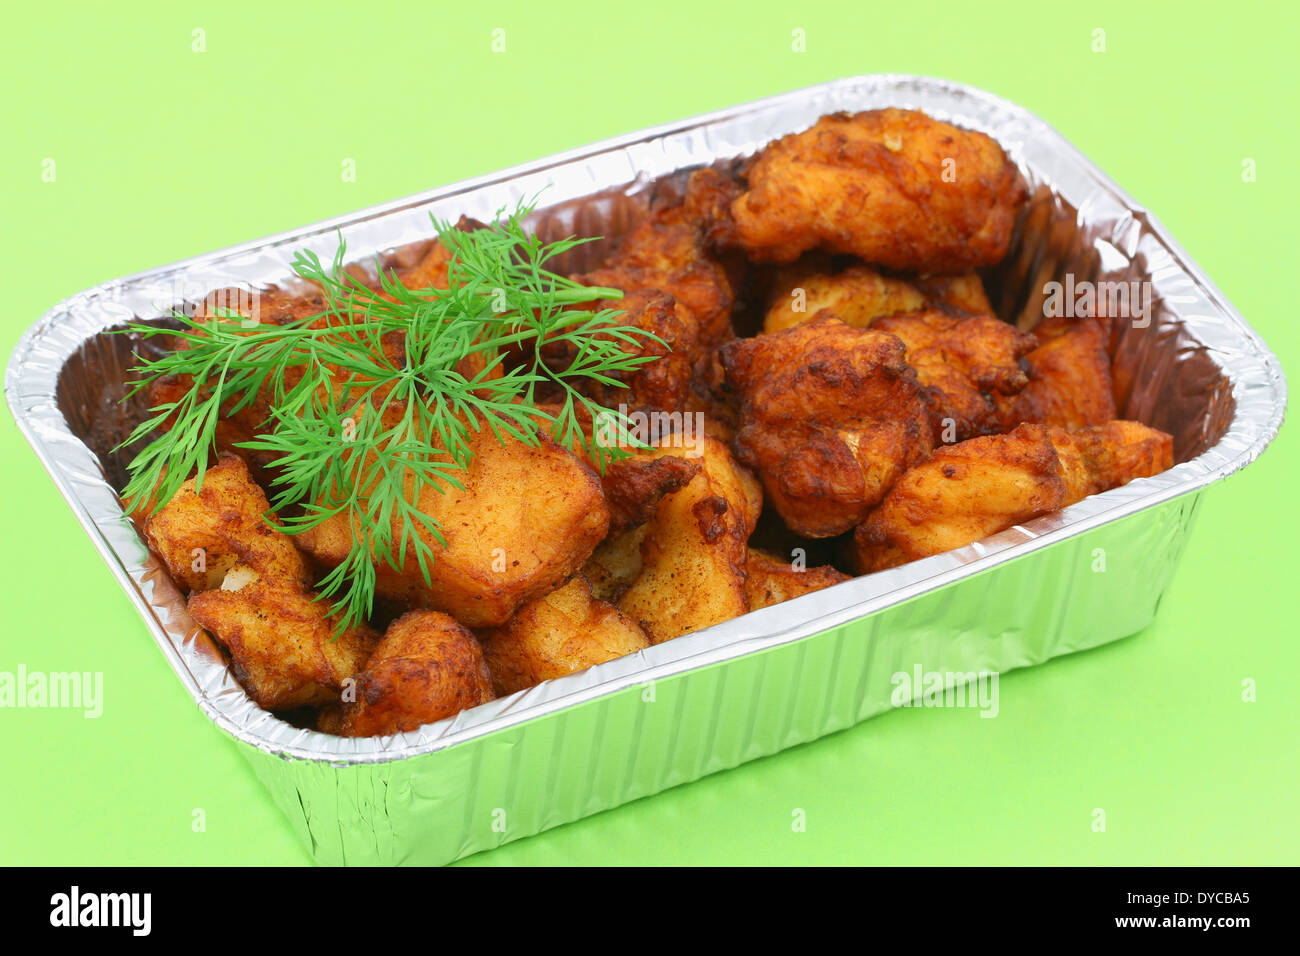 Fried cod pieces in take away tray Stock Photo